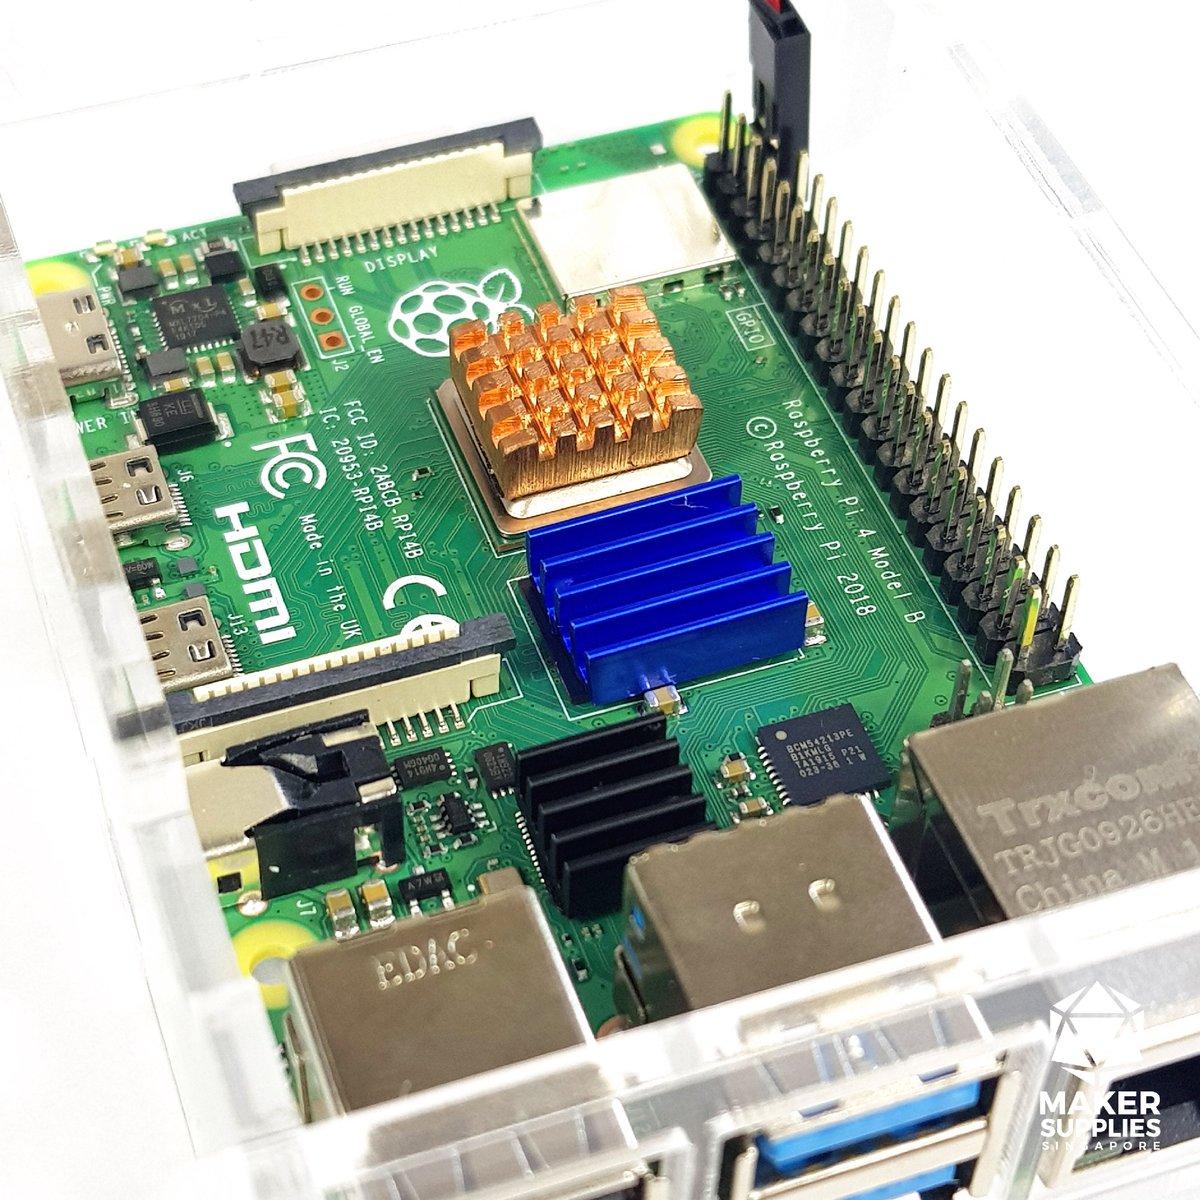 Why I sold my Raspberry Pi 4 for a Rock Pi 4